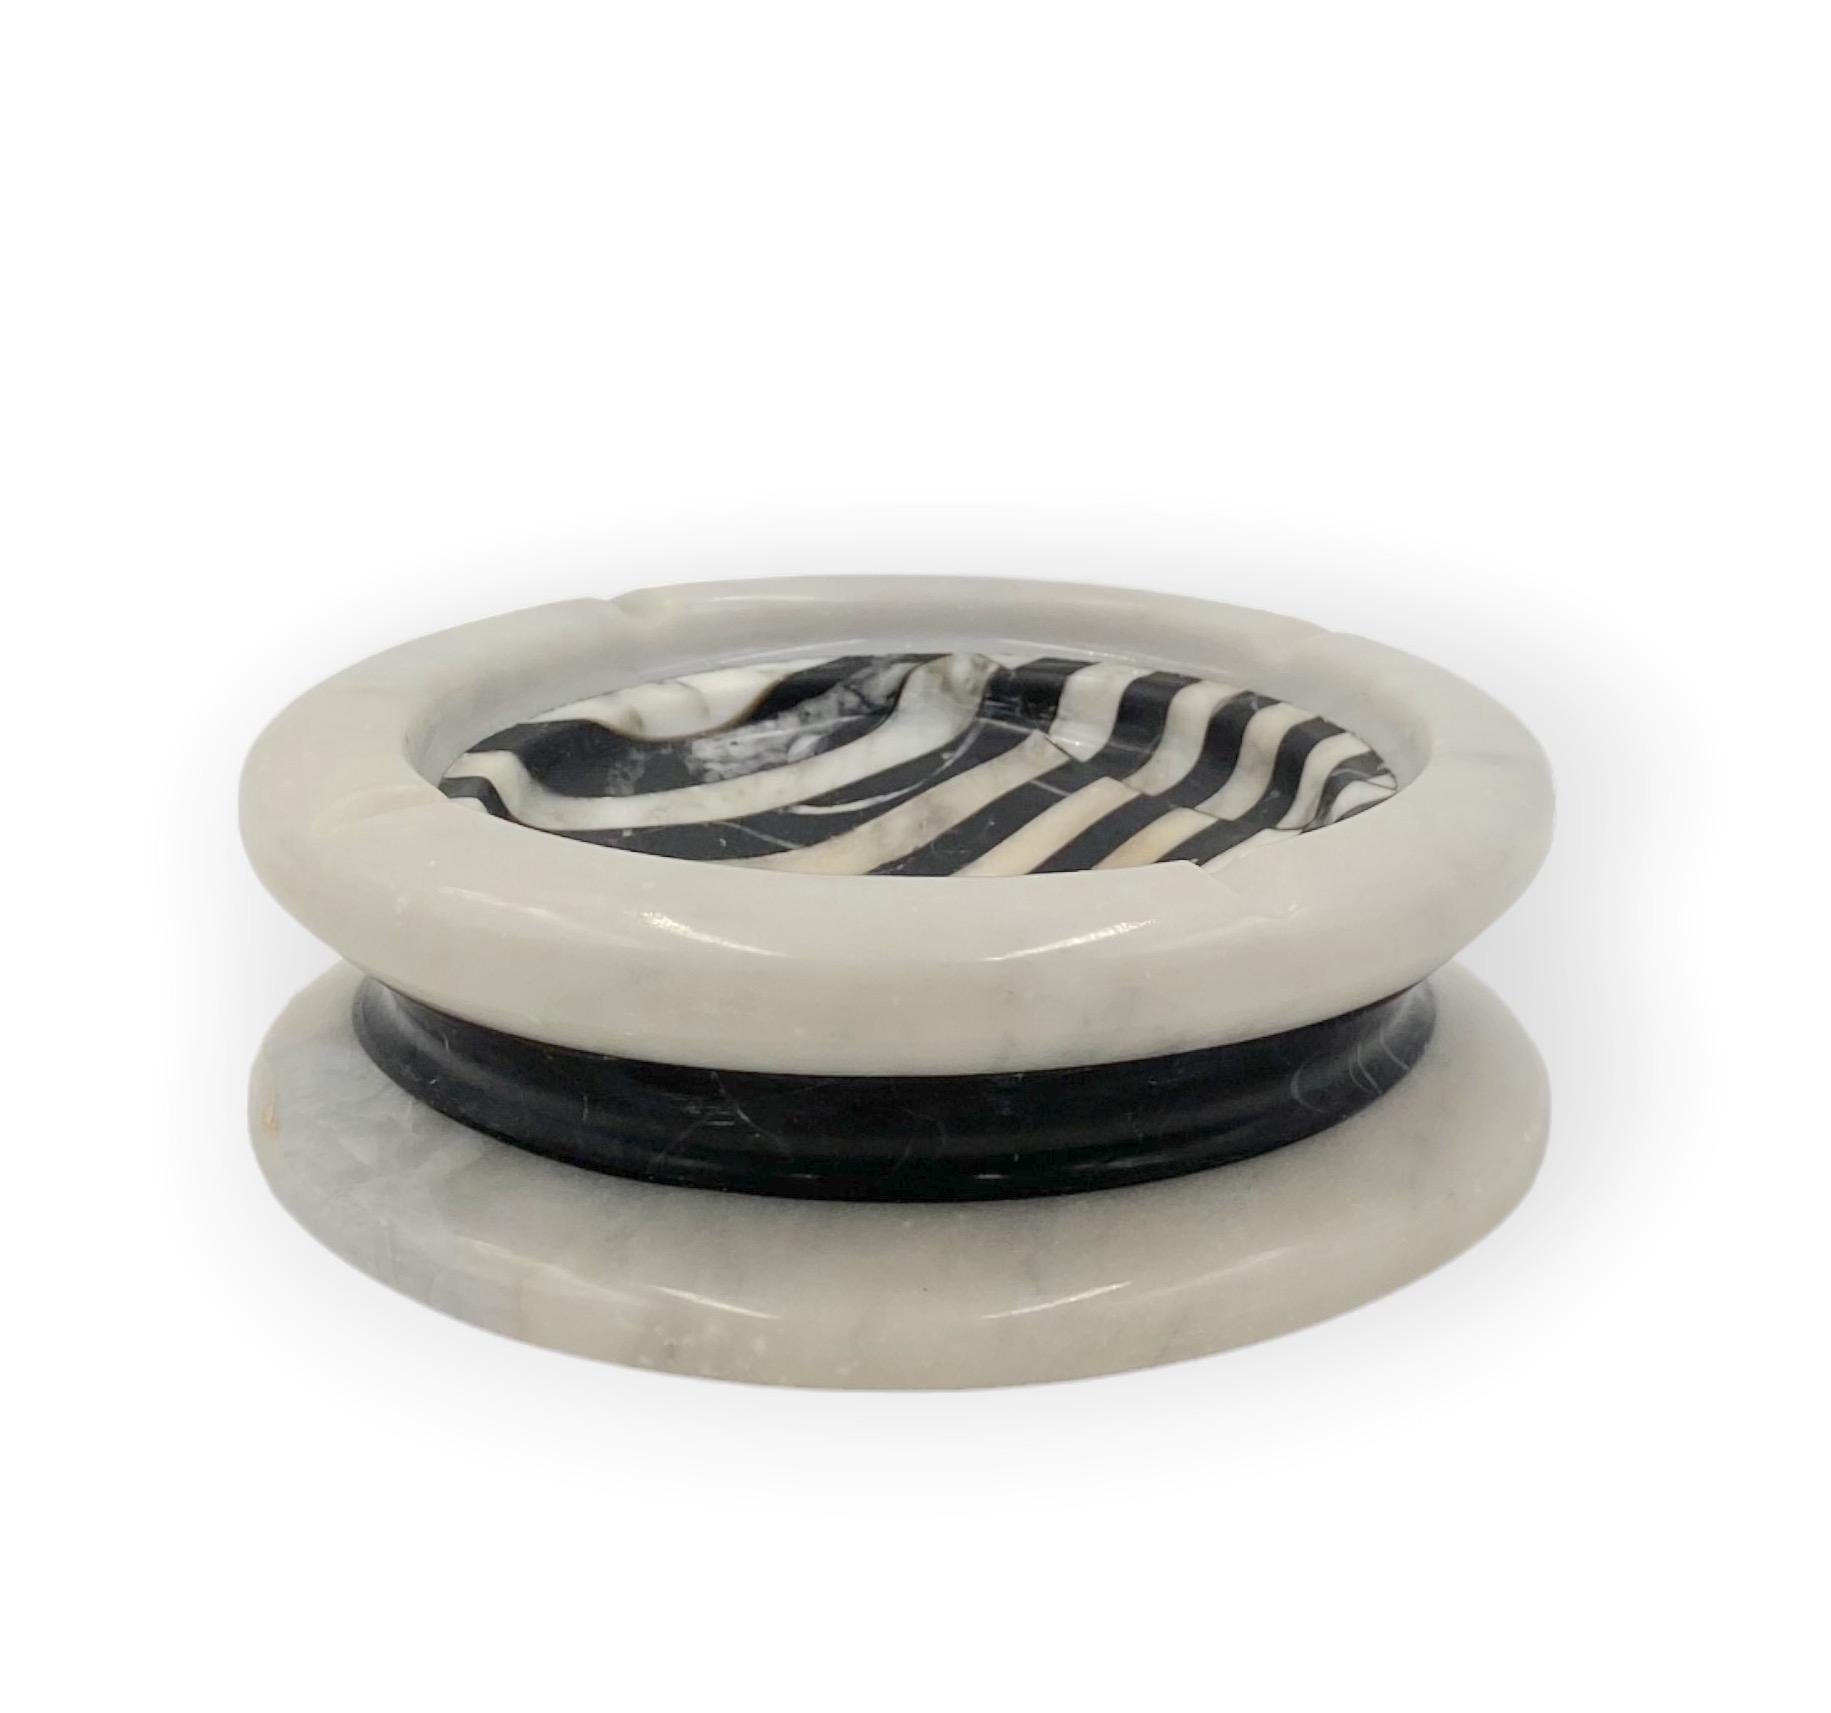 Black and white marble inlays ashtray 

Casigliani Italy, 1970s

16 diam. x 6 cm h

Conditions: very good consistent with age and use. Slight signs of wear.